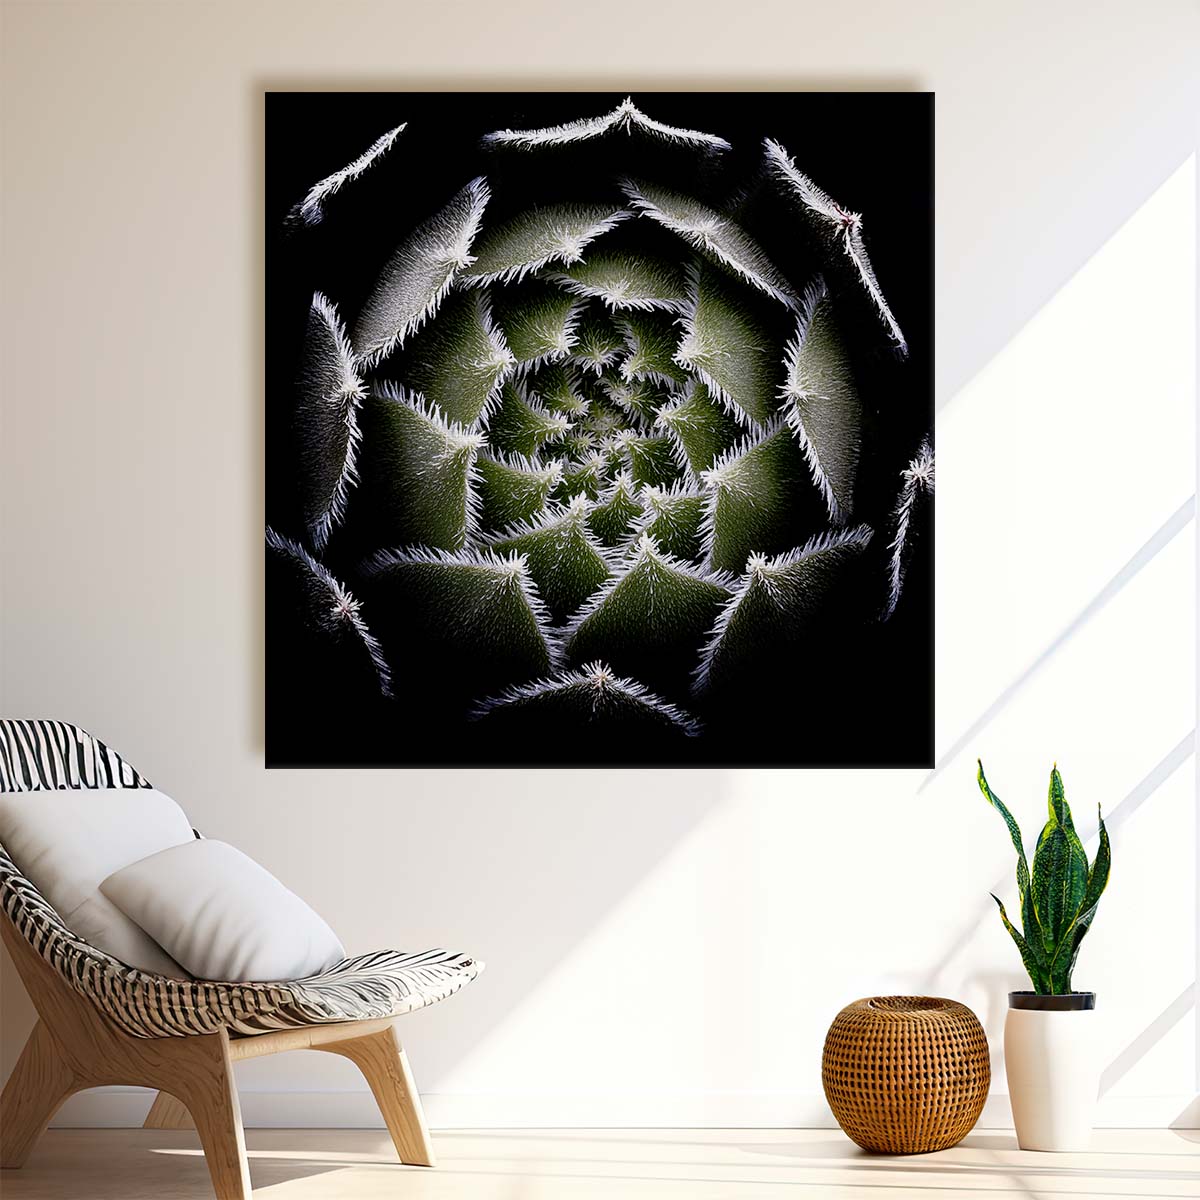 Geometric Floral Masterpiece Abstract Succulent Rosette Macro Wall Art by Luxuriance Designs. Made in USA.